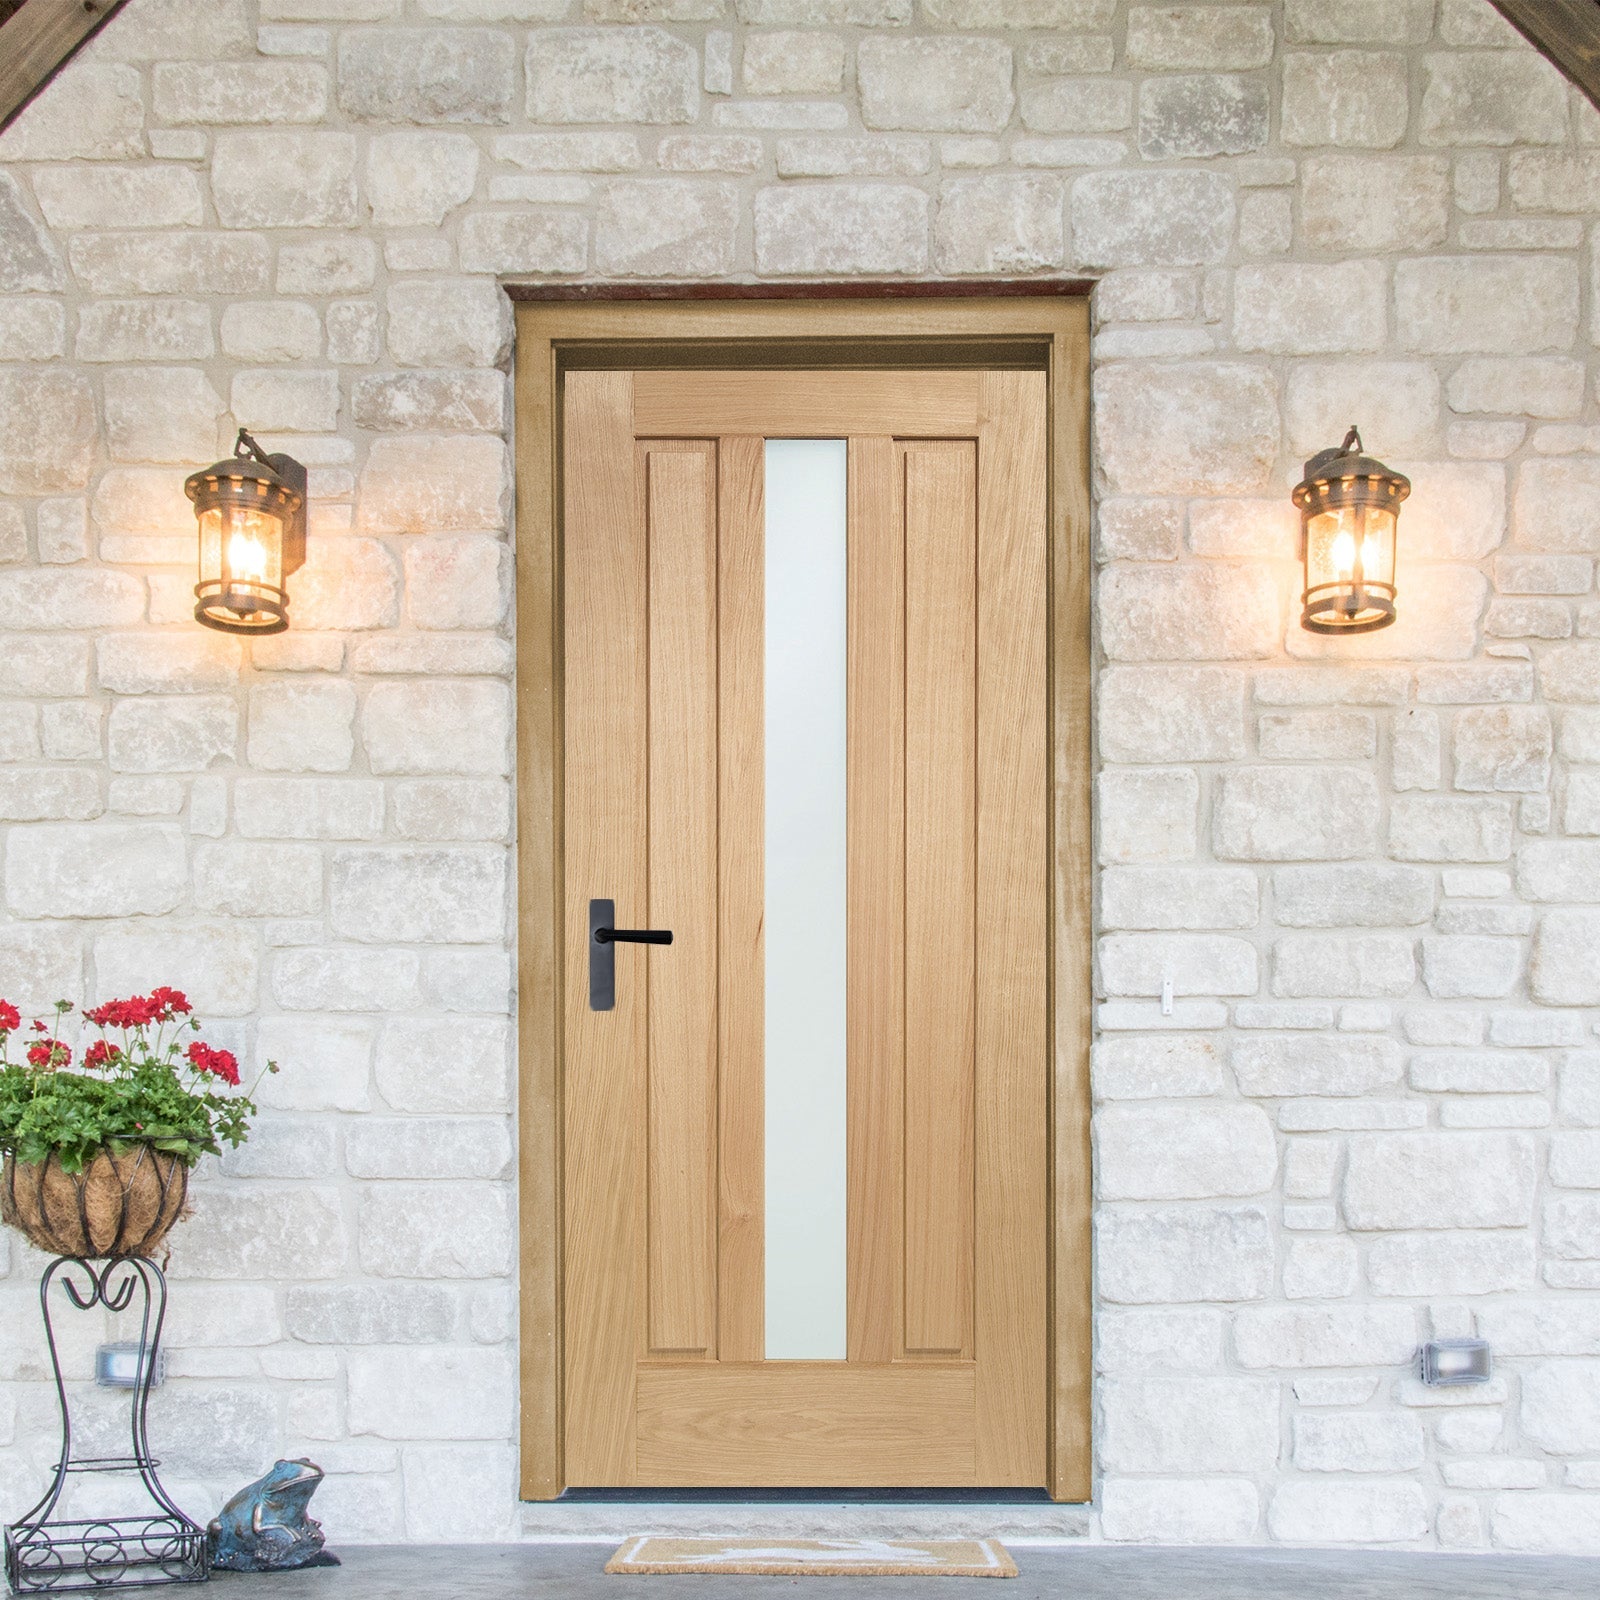 SHOW External Oak Padova M&T Door with Double Glazed Obscure Glass lifestyle